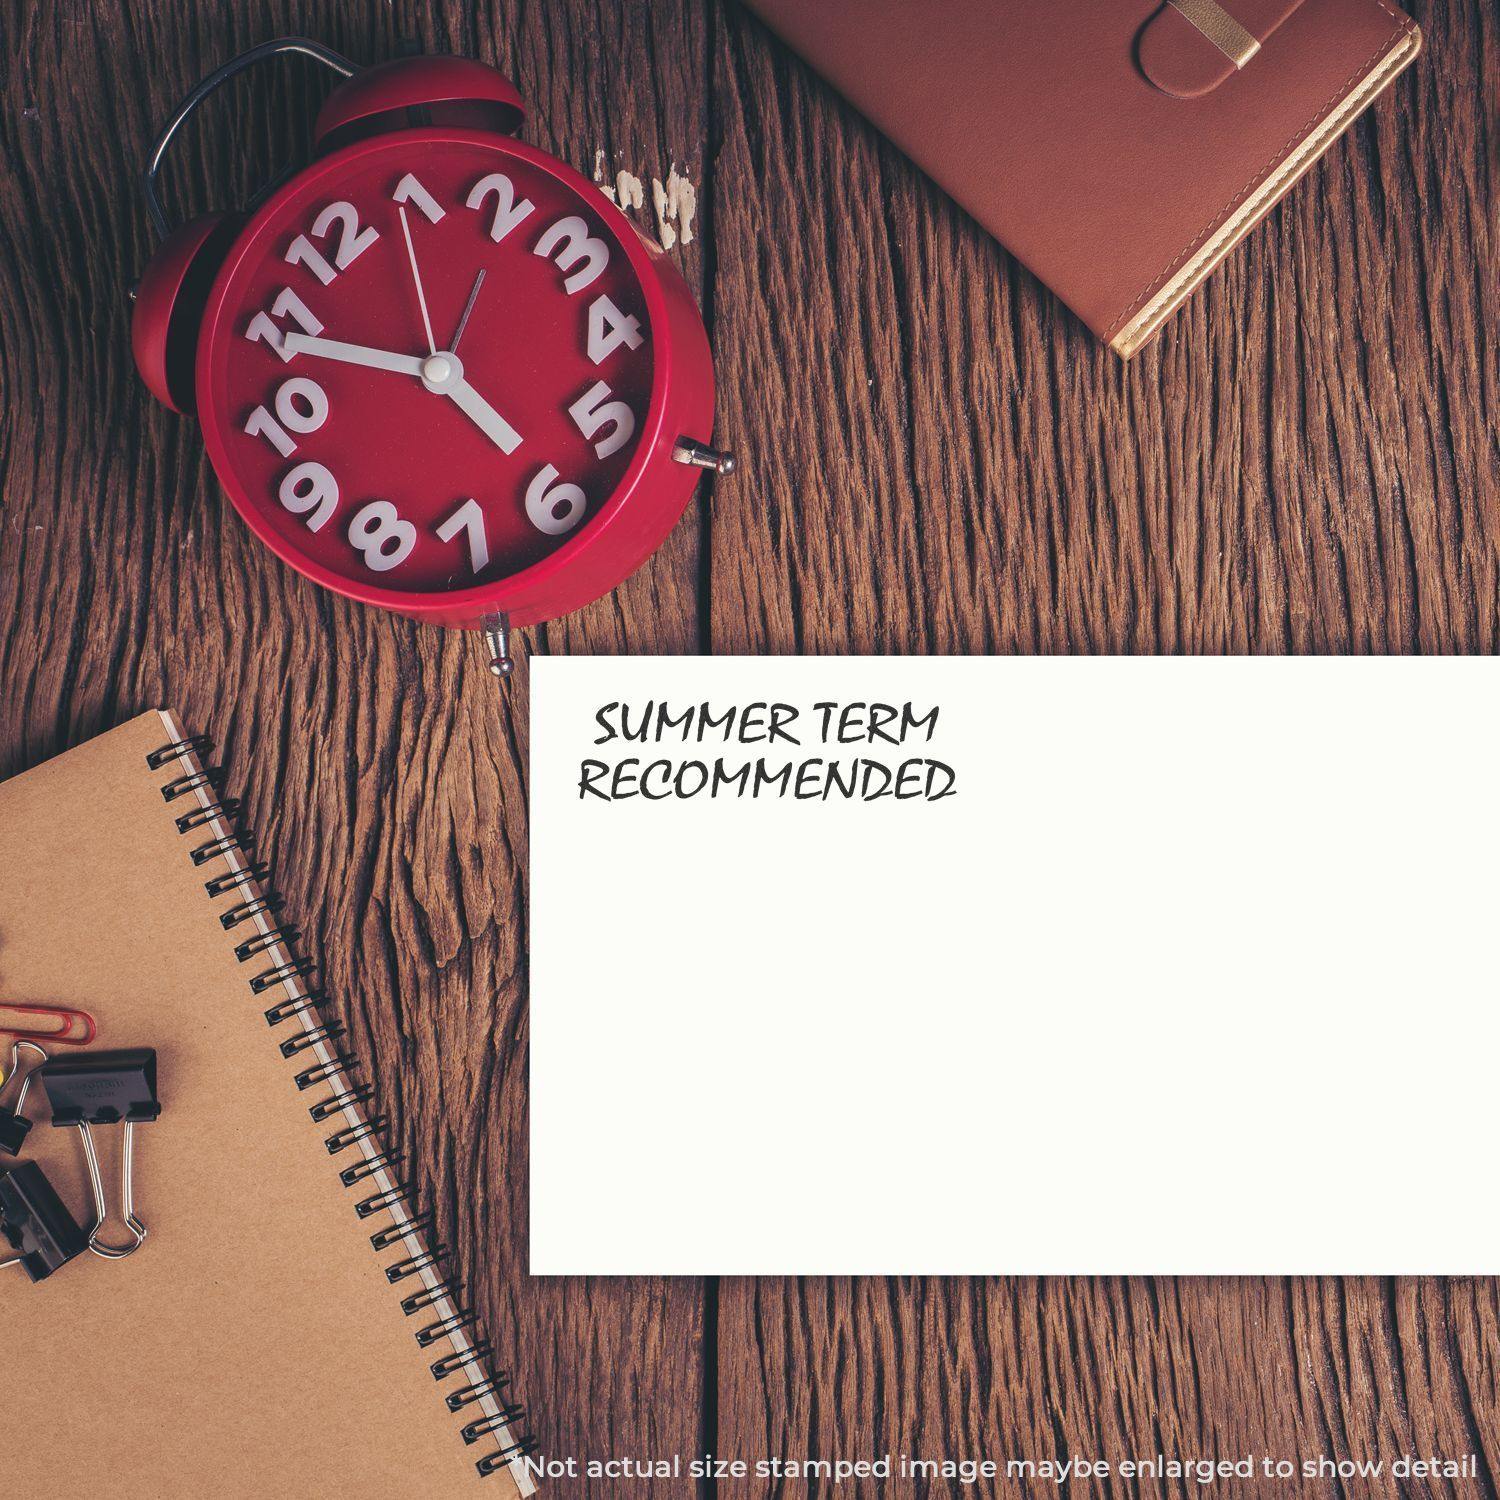 A self-inking stamp with a stamped image showing how the text "SUMMER TERM RECOMMENDED" in a large bold font is displayed by it.